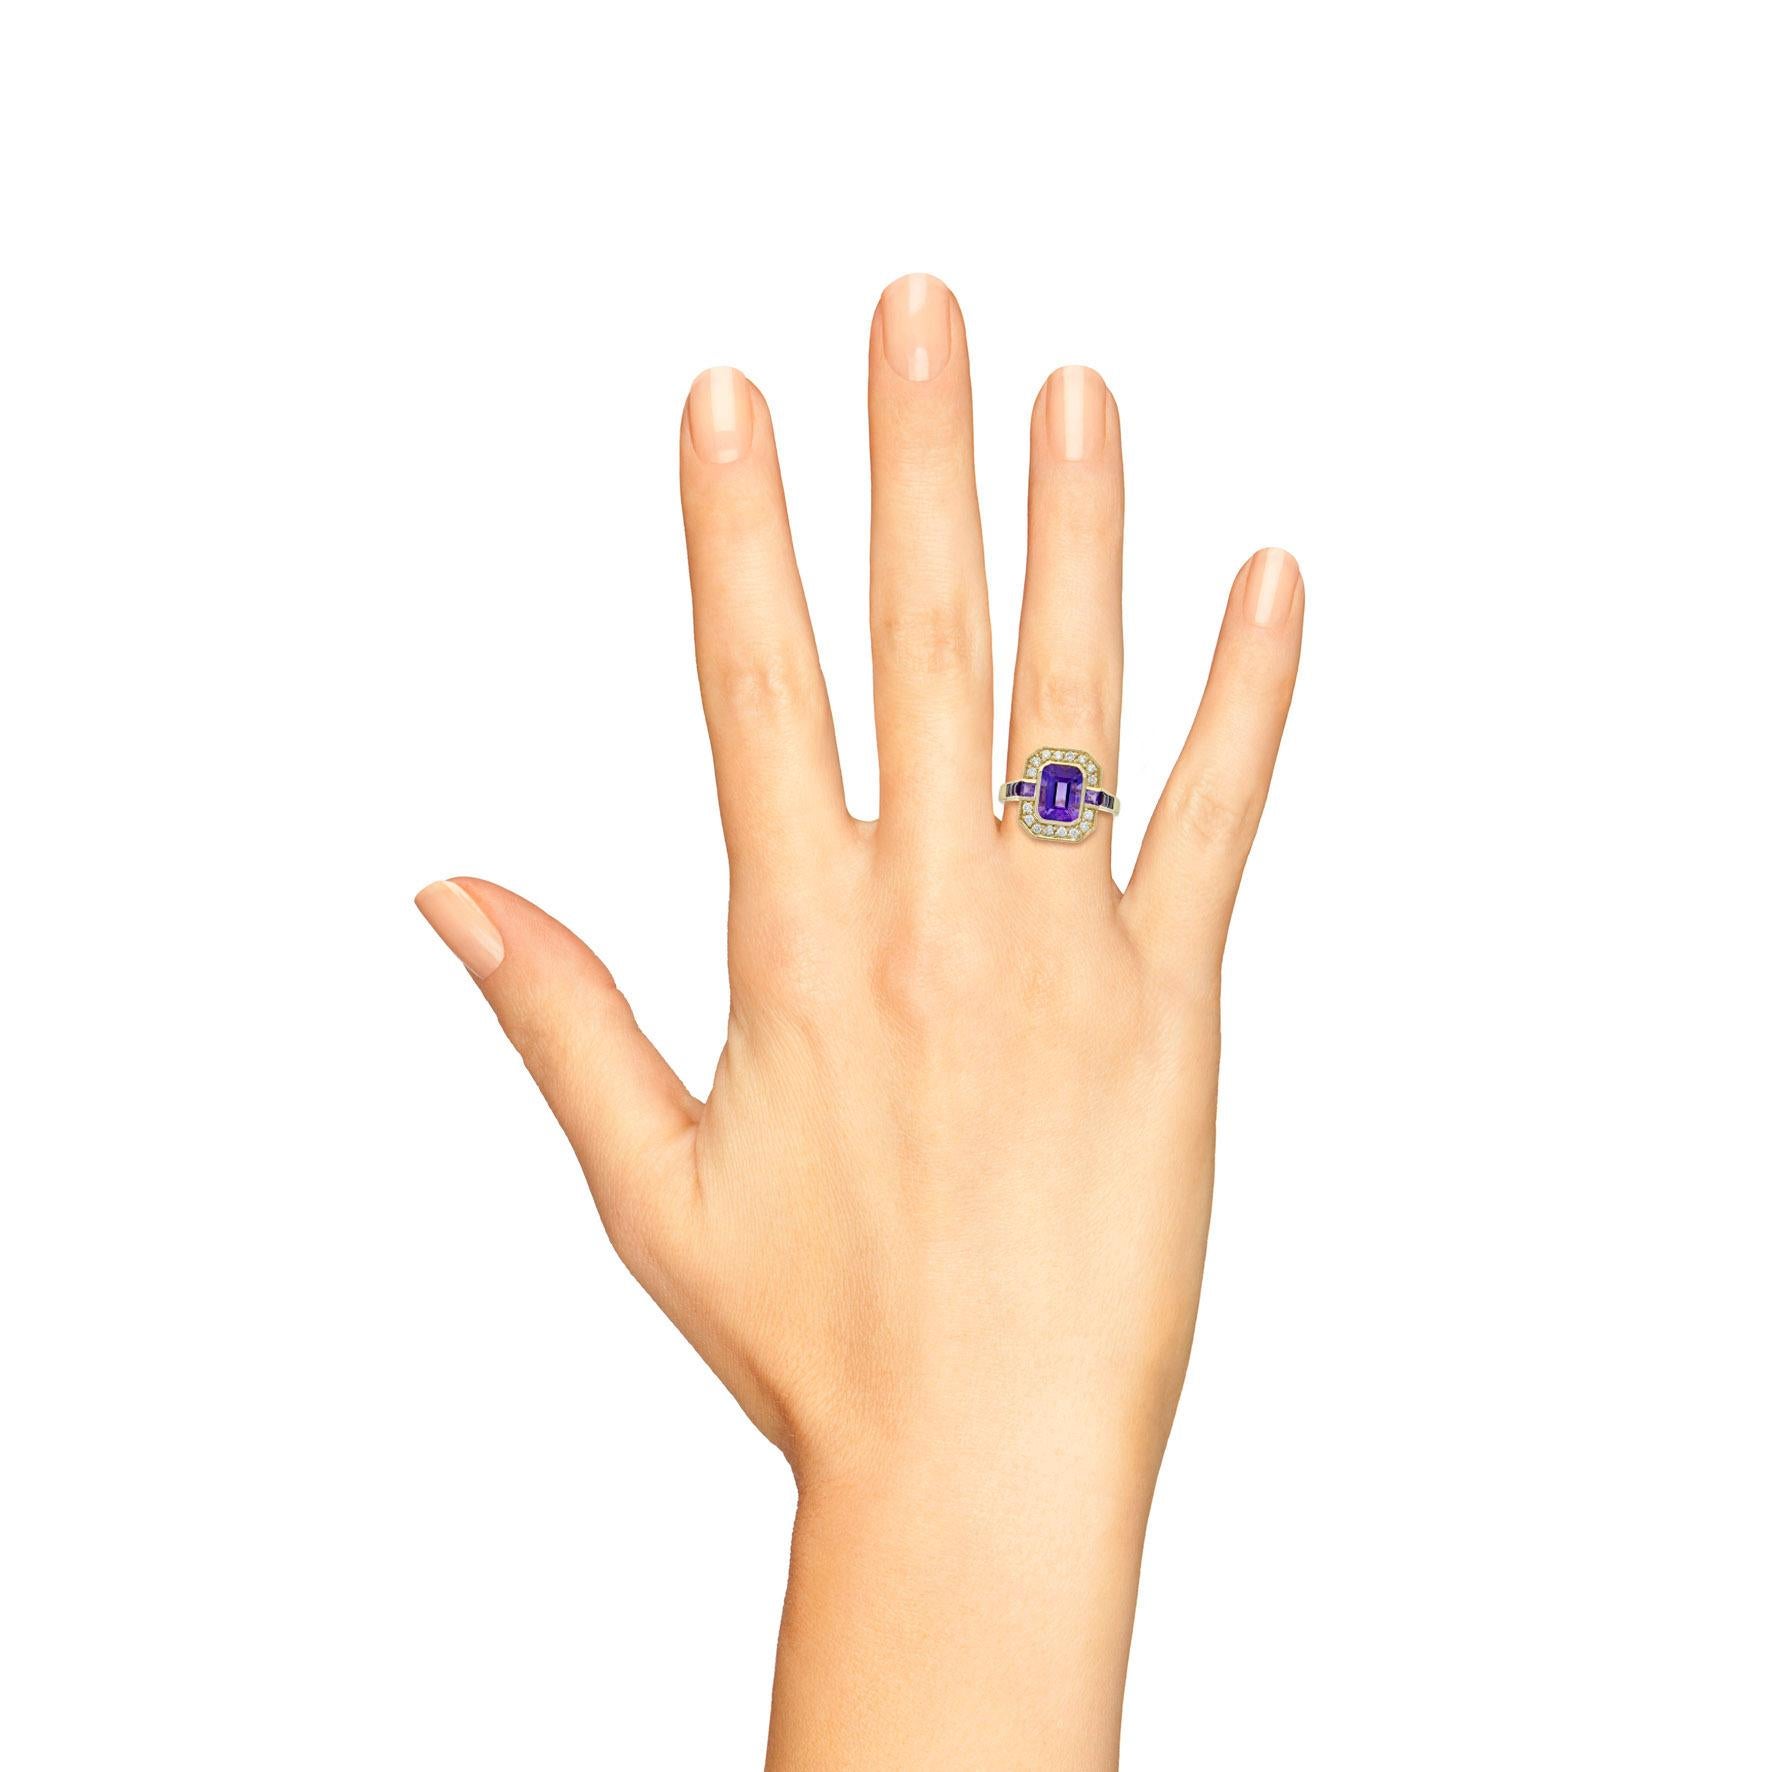 A chic emerald-cut amethyst is presented in classic Art Deco style. The glorious gemstone radiates from within a sparkling halo of bright white round brilliant cut diamonds, leading to a slightly flared diamond on the shoulder all set in 9k yellow